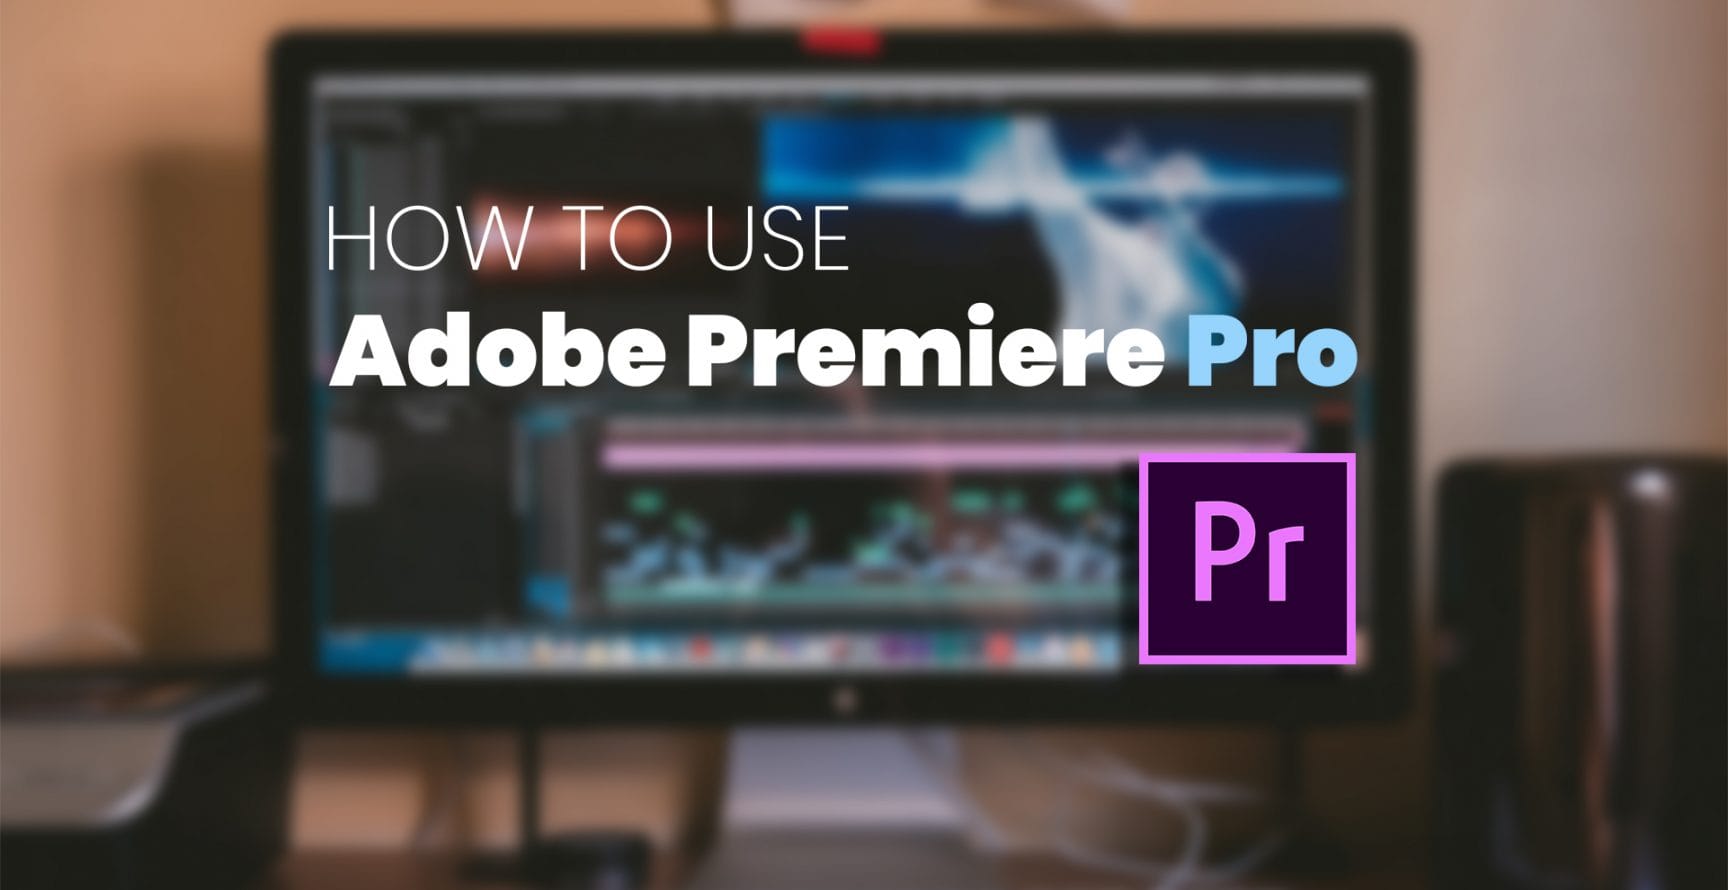 How to use Adobe Premiere Pro - Title Image